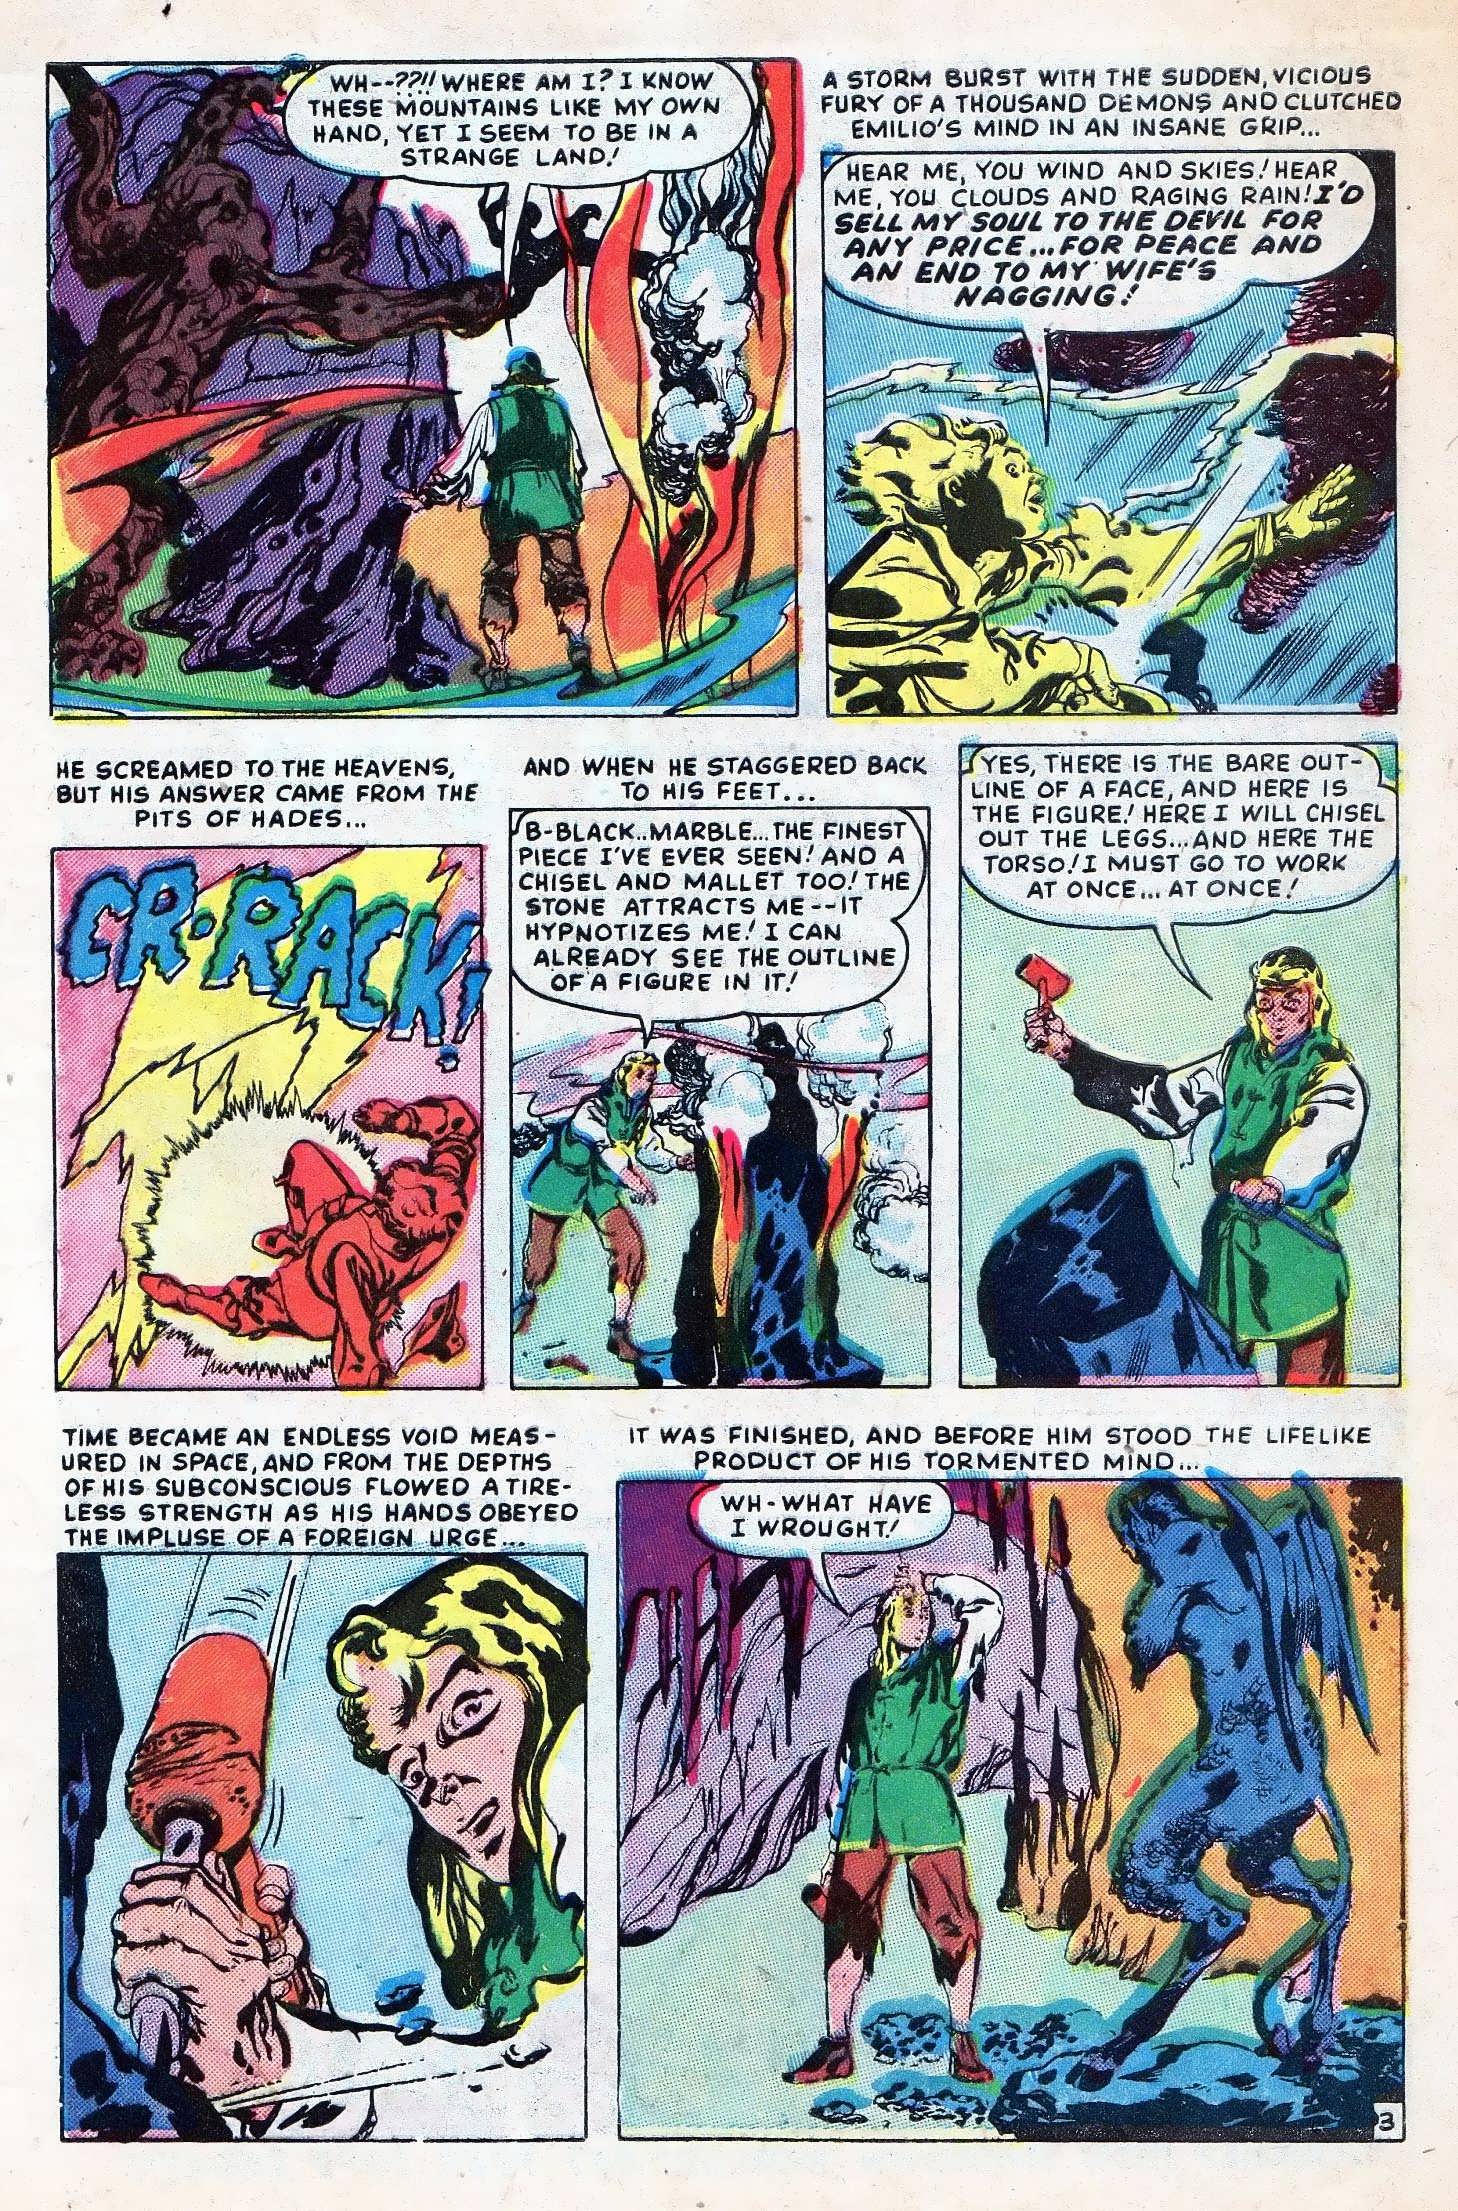 Marvel Tales (1949) 98 Page 4